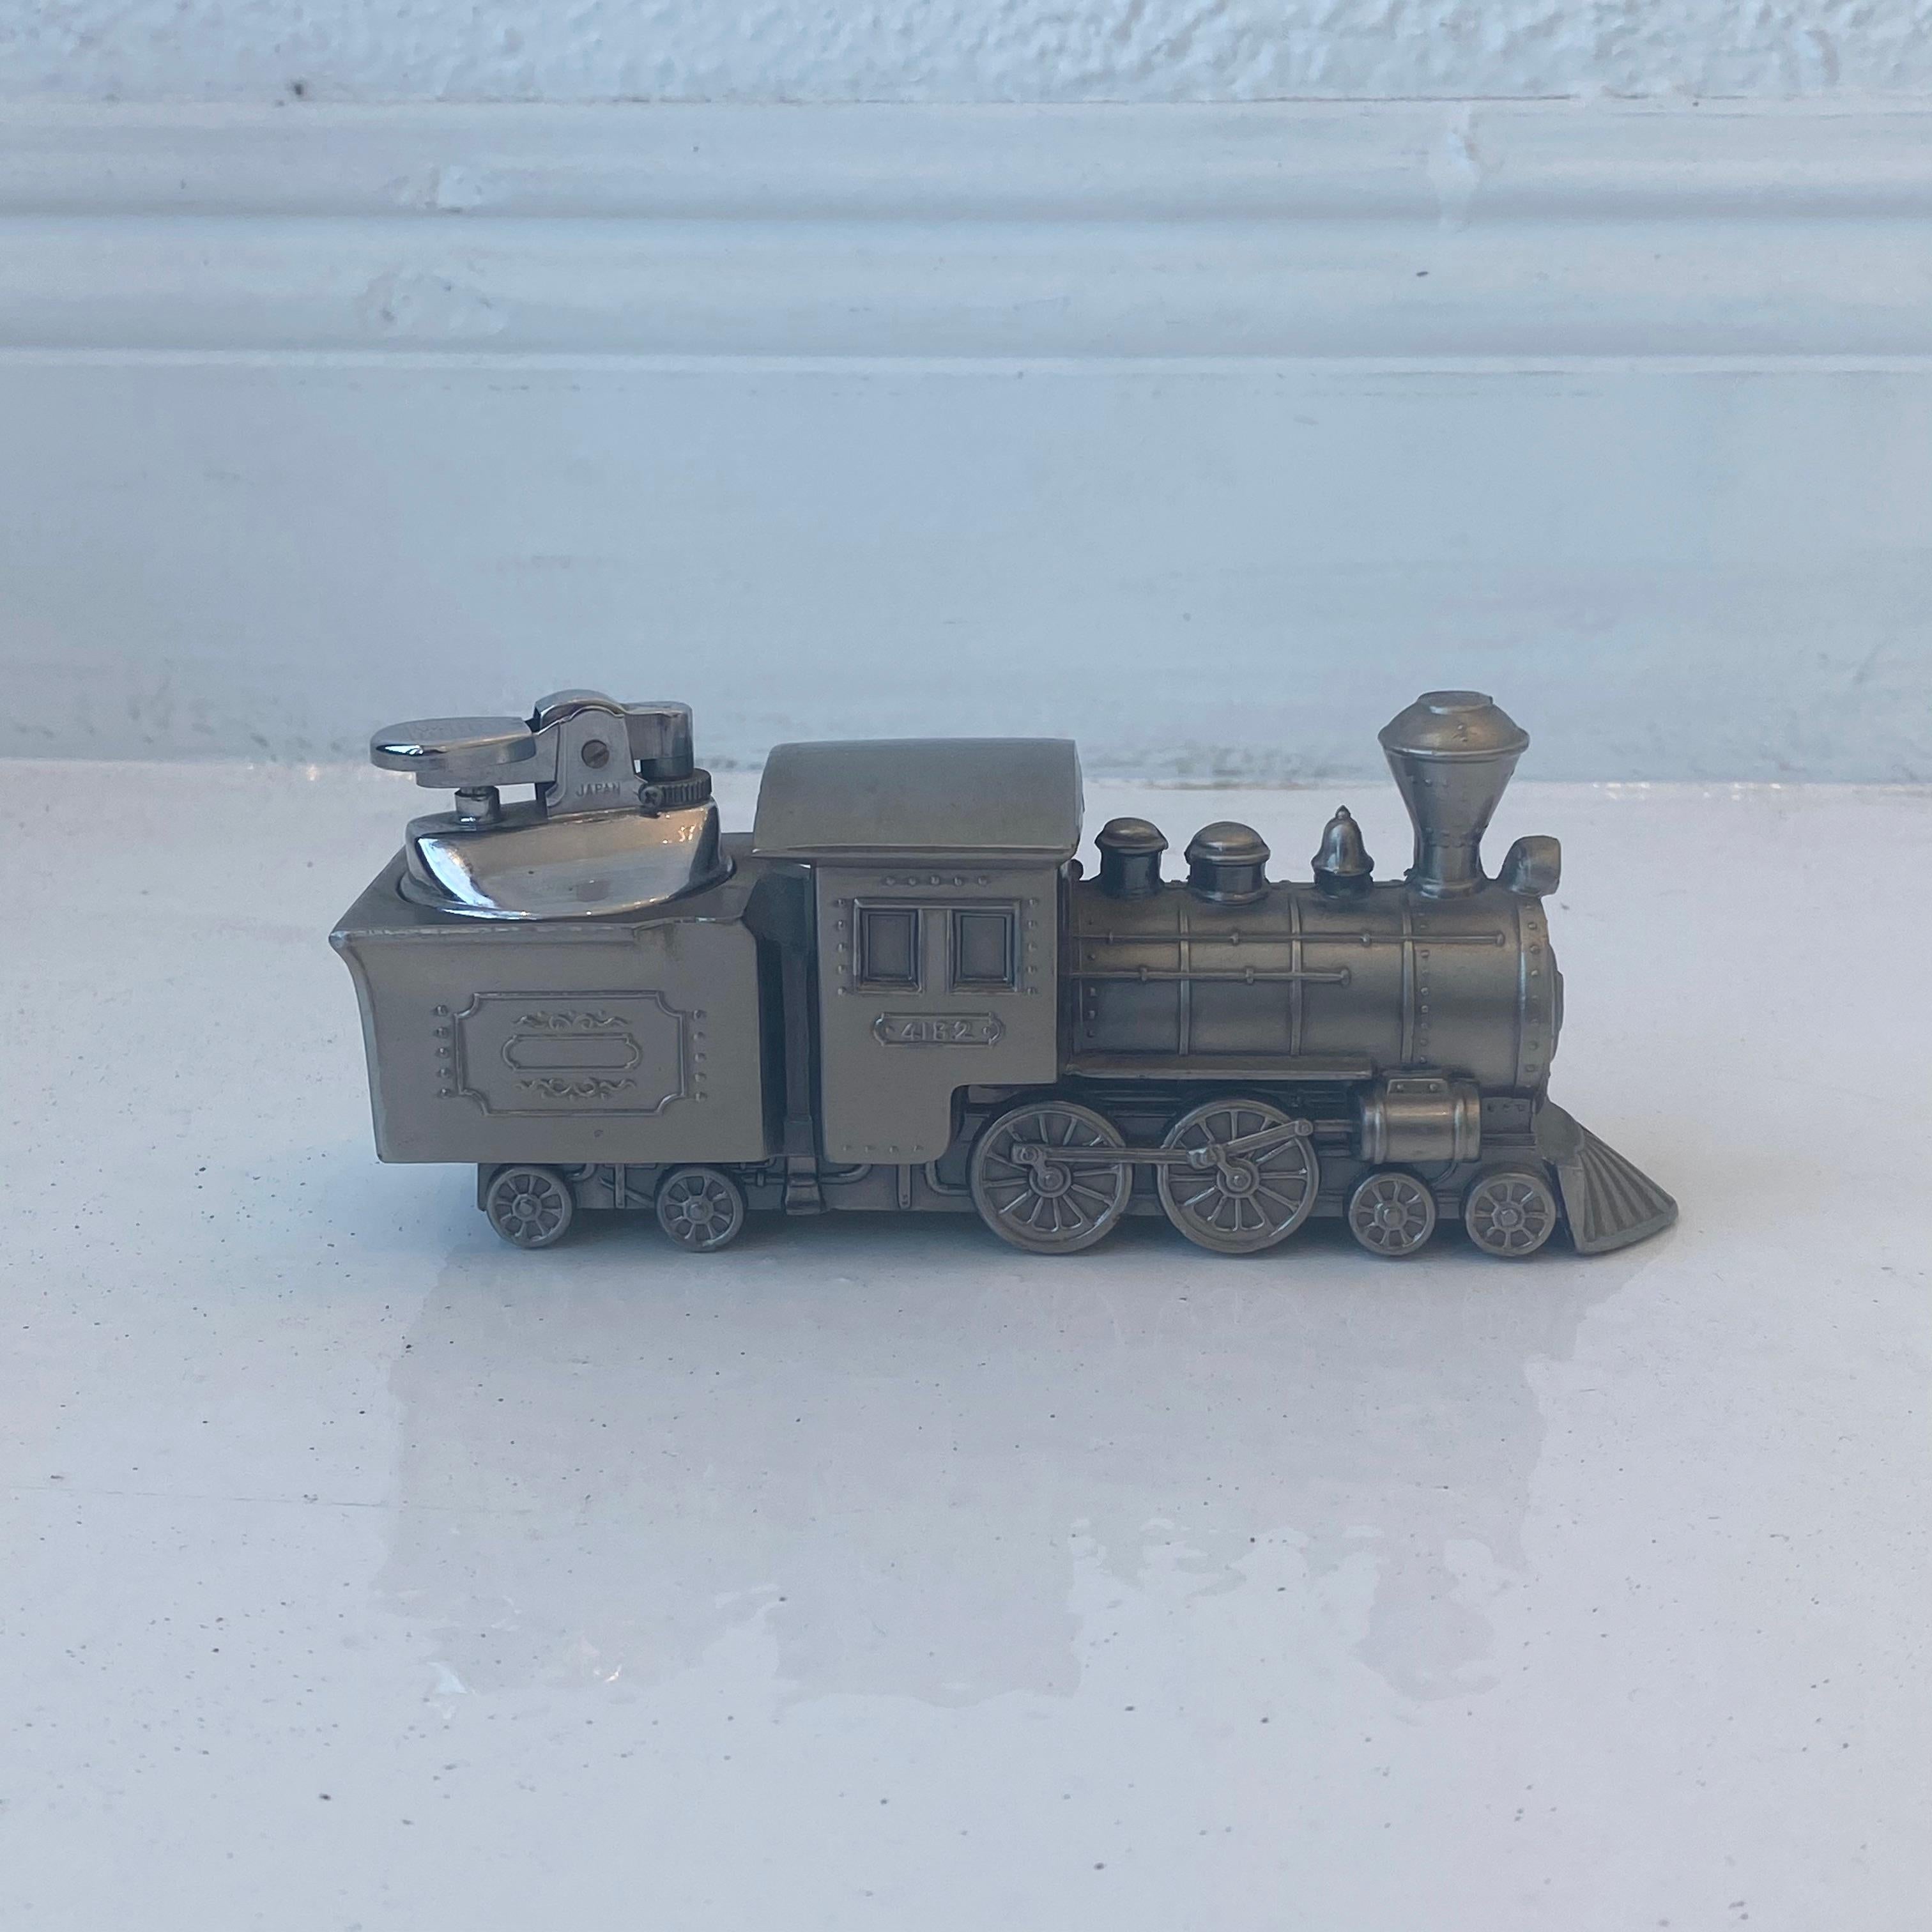 Unique vintage table lighter in the shape of a train. Made of metal with 